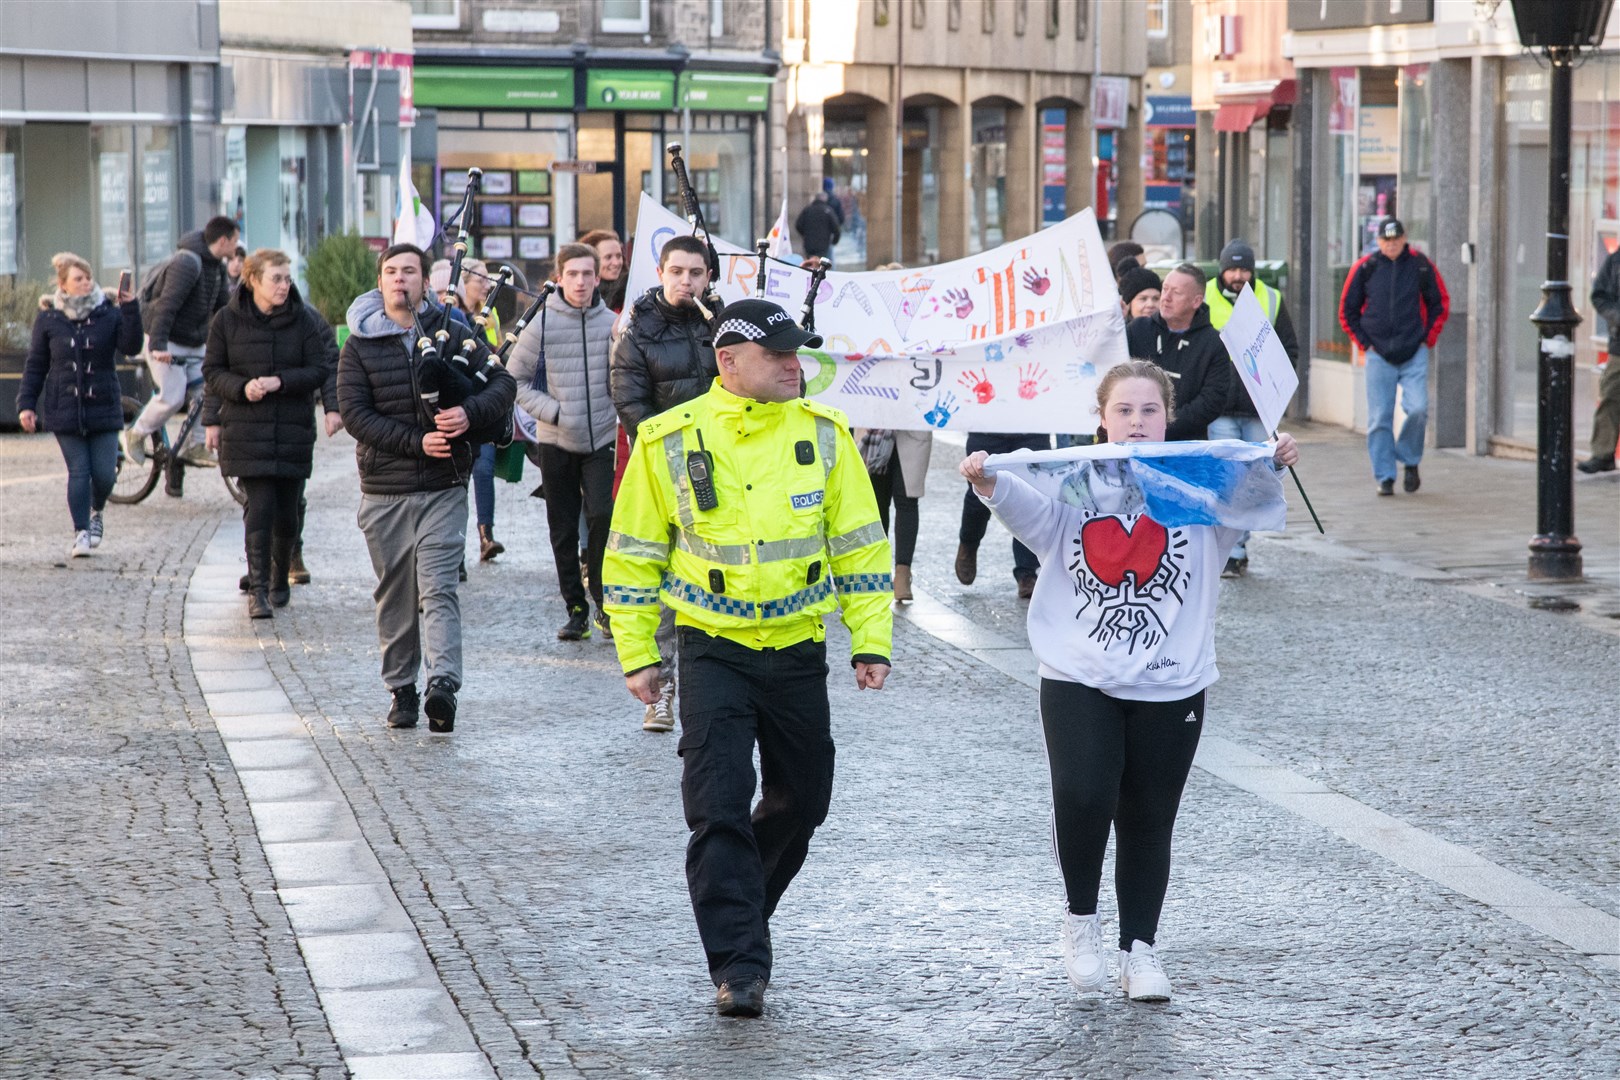 They marched from the Council HQ, around the Plainstones and then back to the HQ...Moray Council celebrate Care day - a national day of recognising and celebrating care experience. ..Picture: Daniel Forsyth..